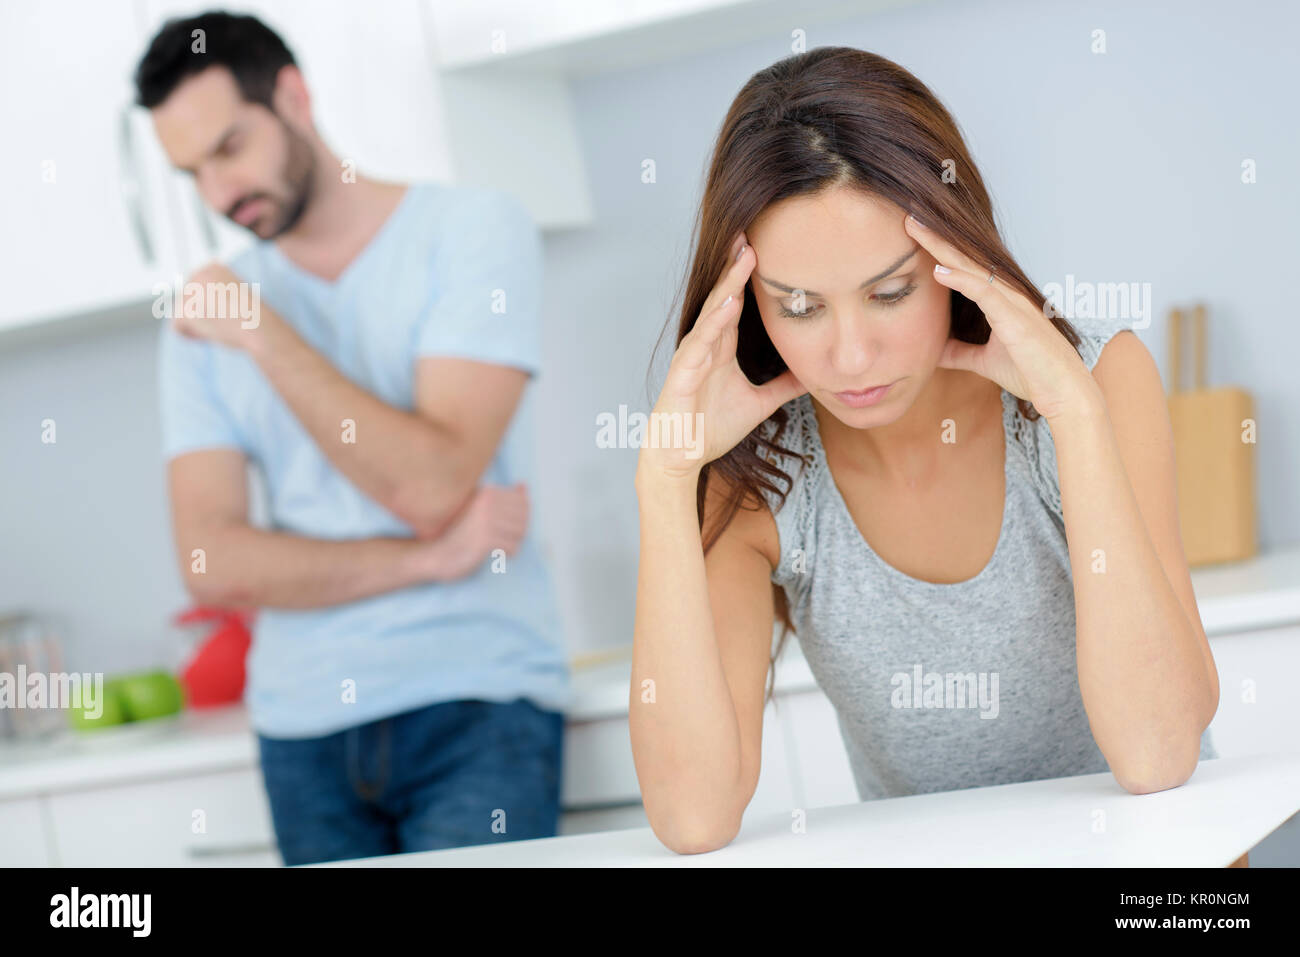 Couple having an argument in the kitchen Stock Photo